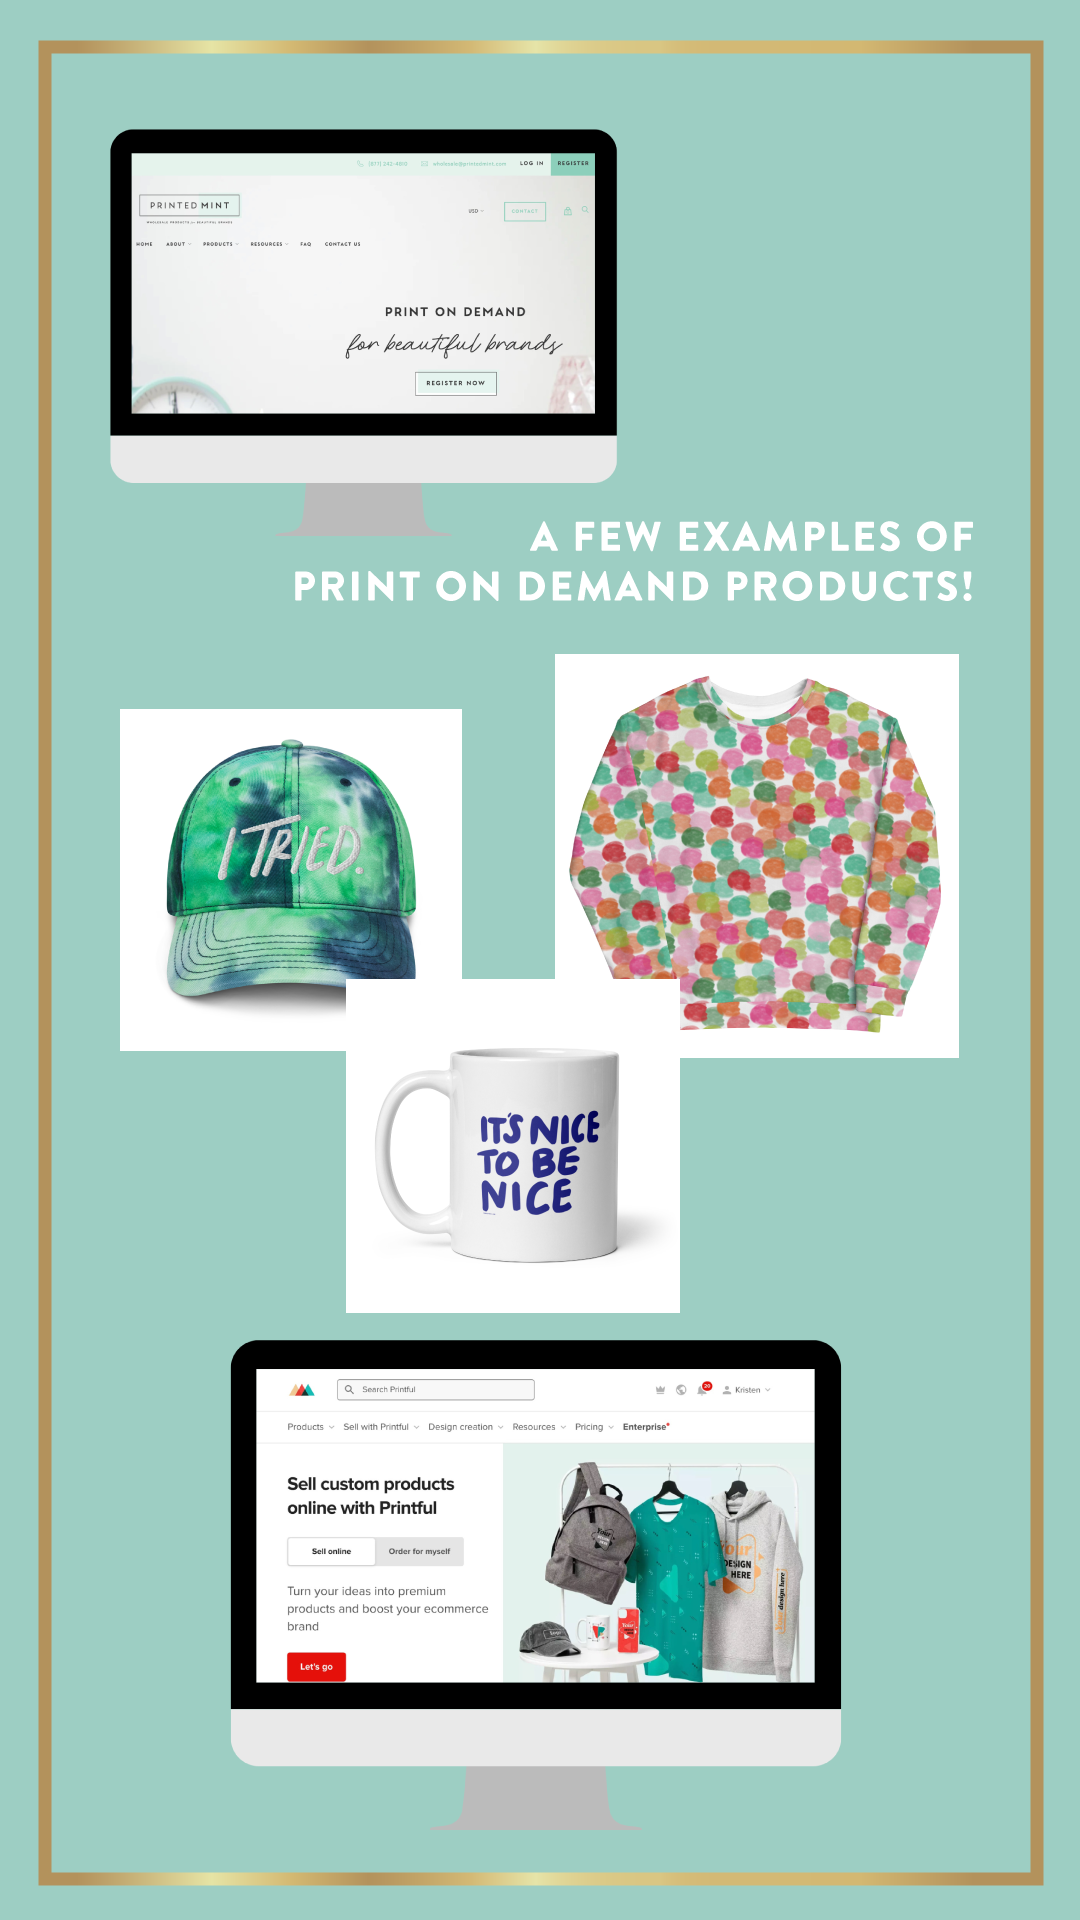 Print On Demand FREE Resource Guide